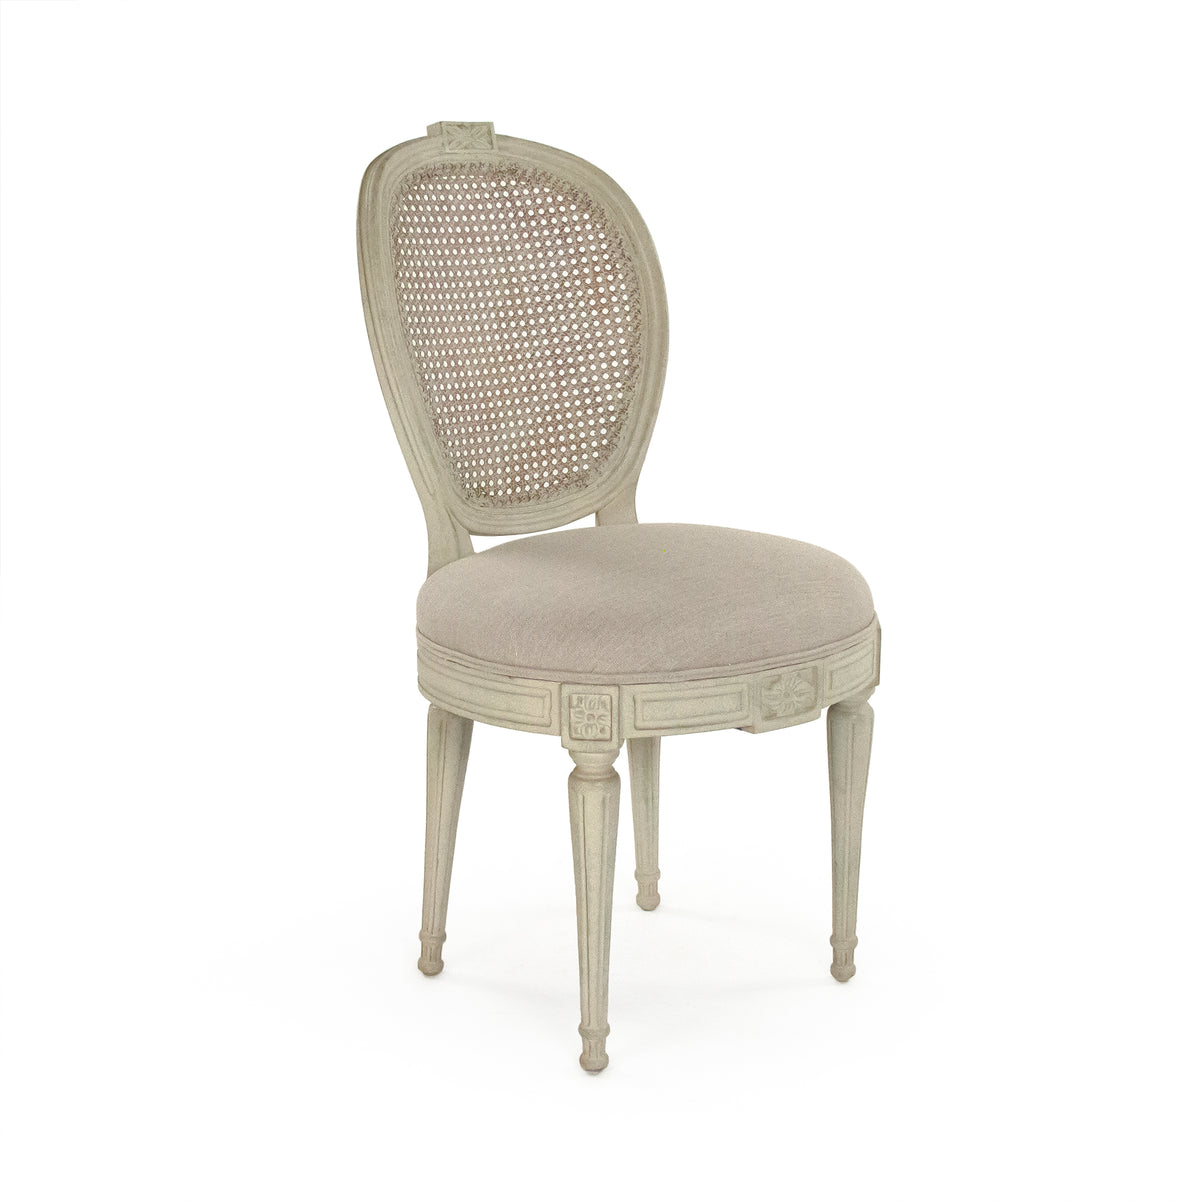 Aimee Side Chair by Zentique